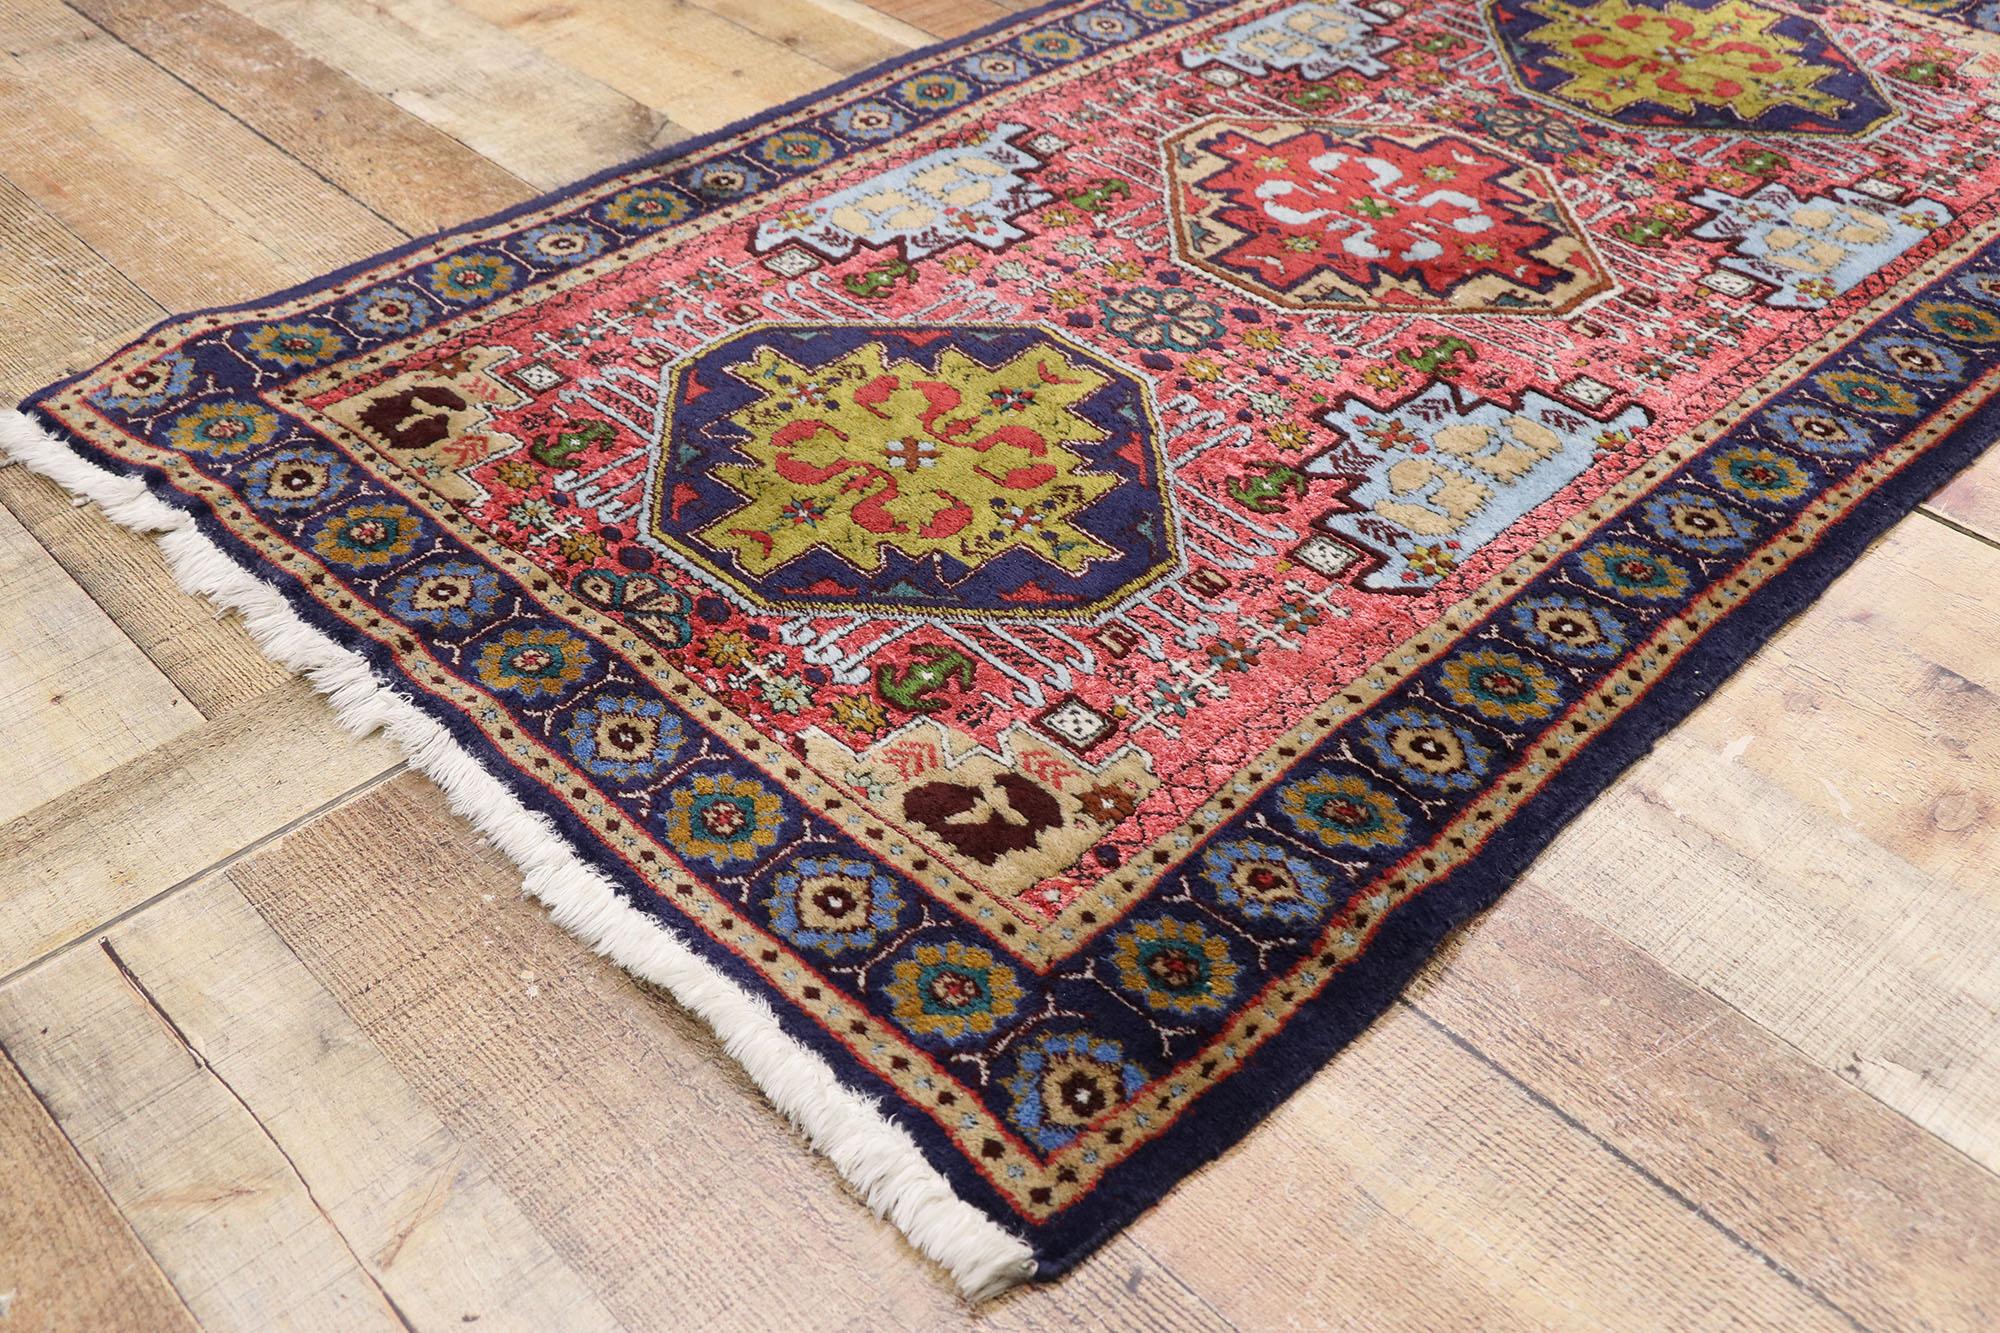 Vintage Persian Ardabil Rug with Boho Chic Tribal Style In Good Condition For Sale In Dallas, TX